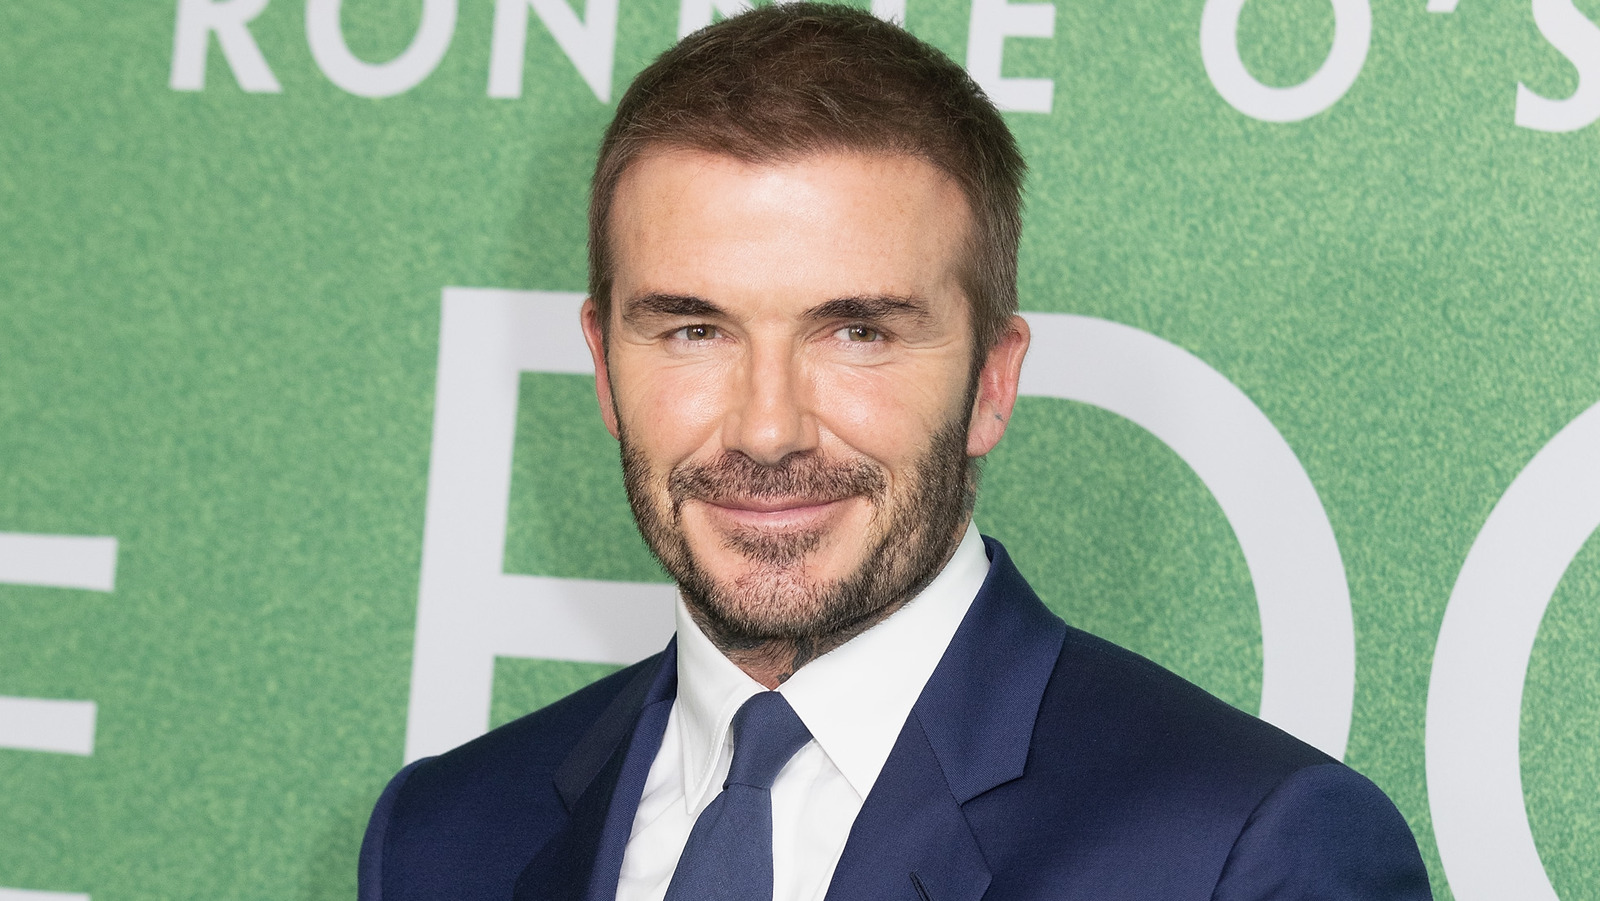 David Beckham: I wouldn't have had the career I had without people